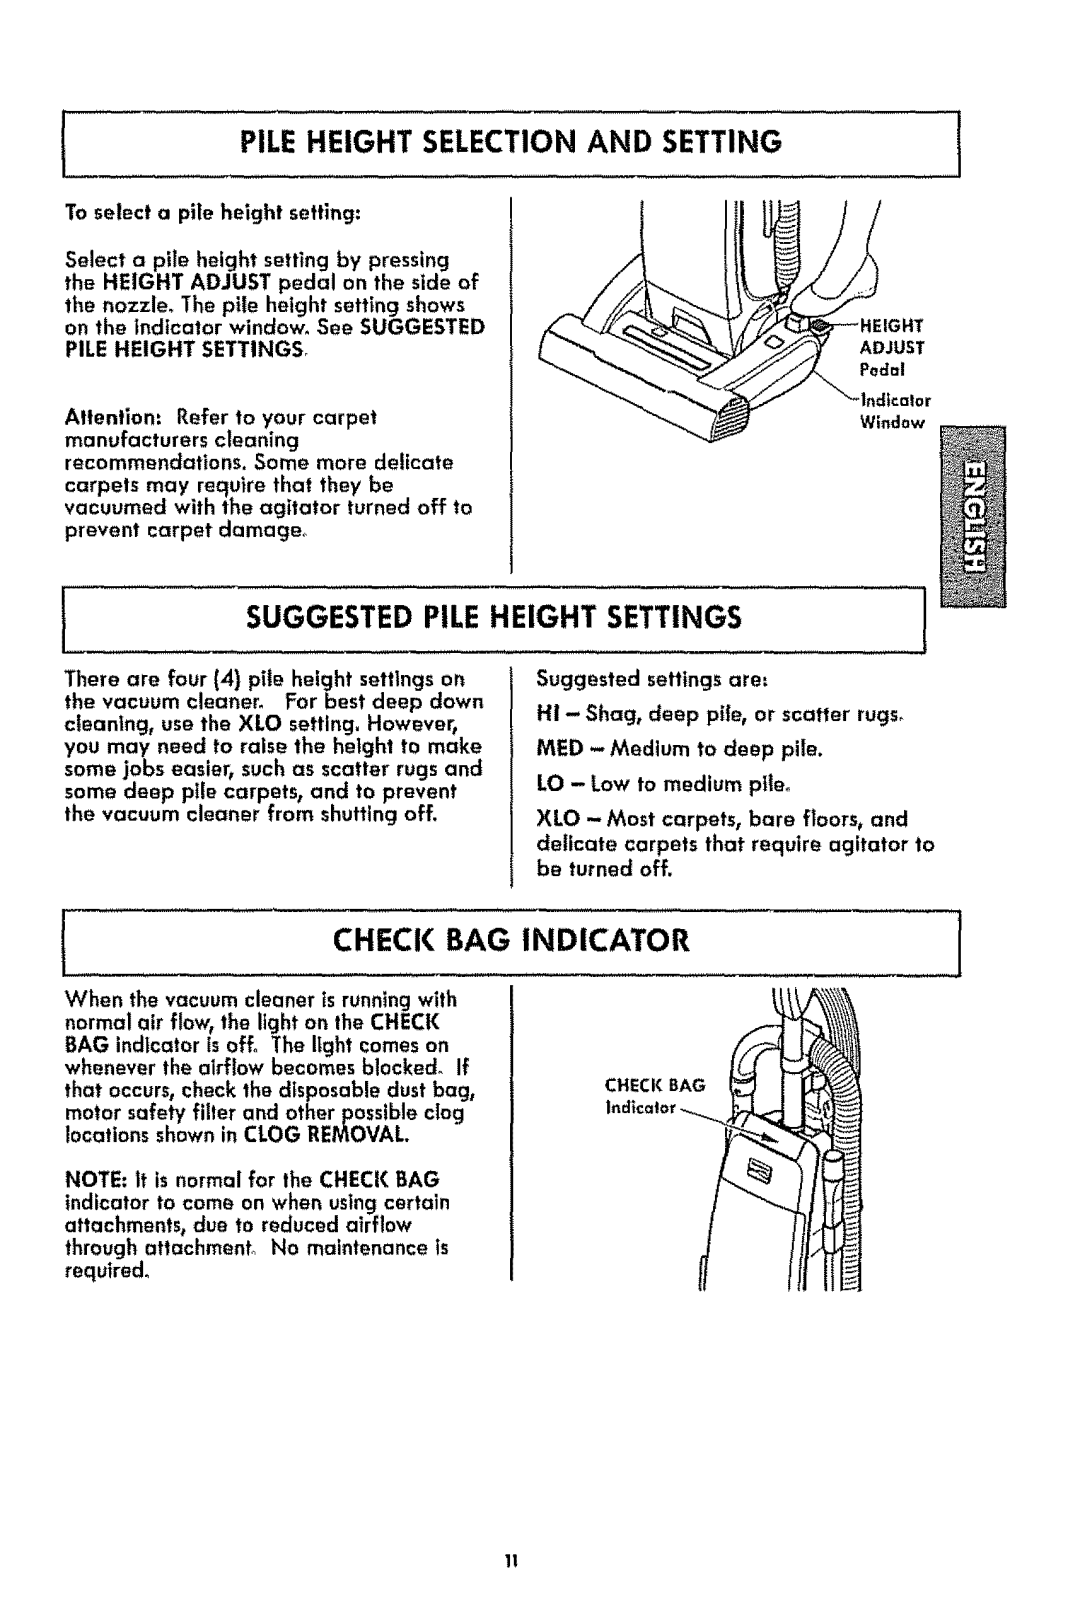 Kenmore 116.3181 manual Pile Height Selection And Setting, Suggested Pile Height Settings, Check Bag Indicator 